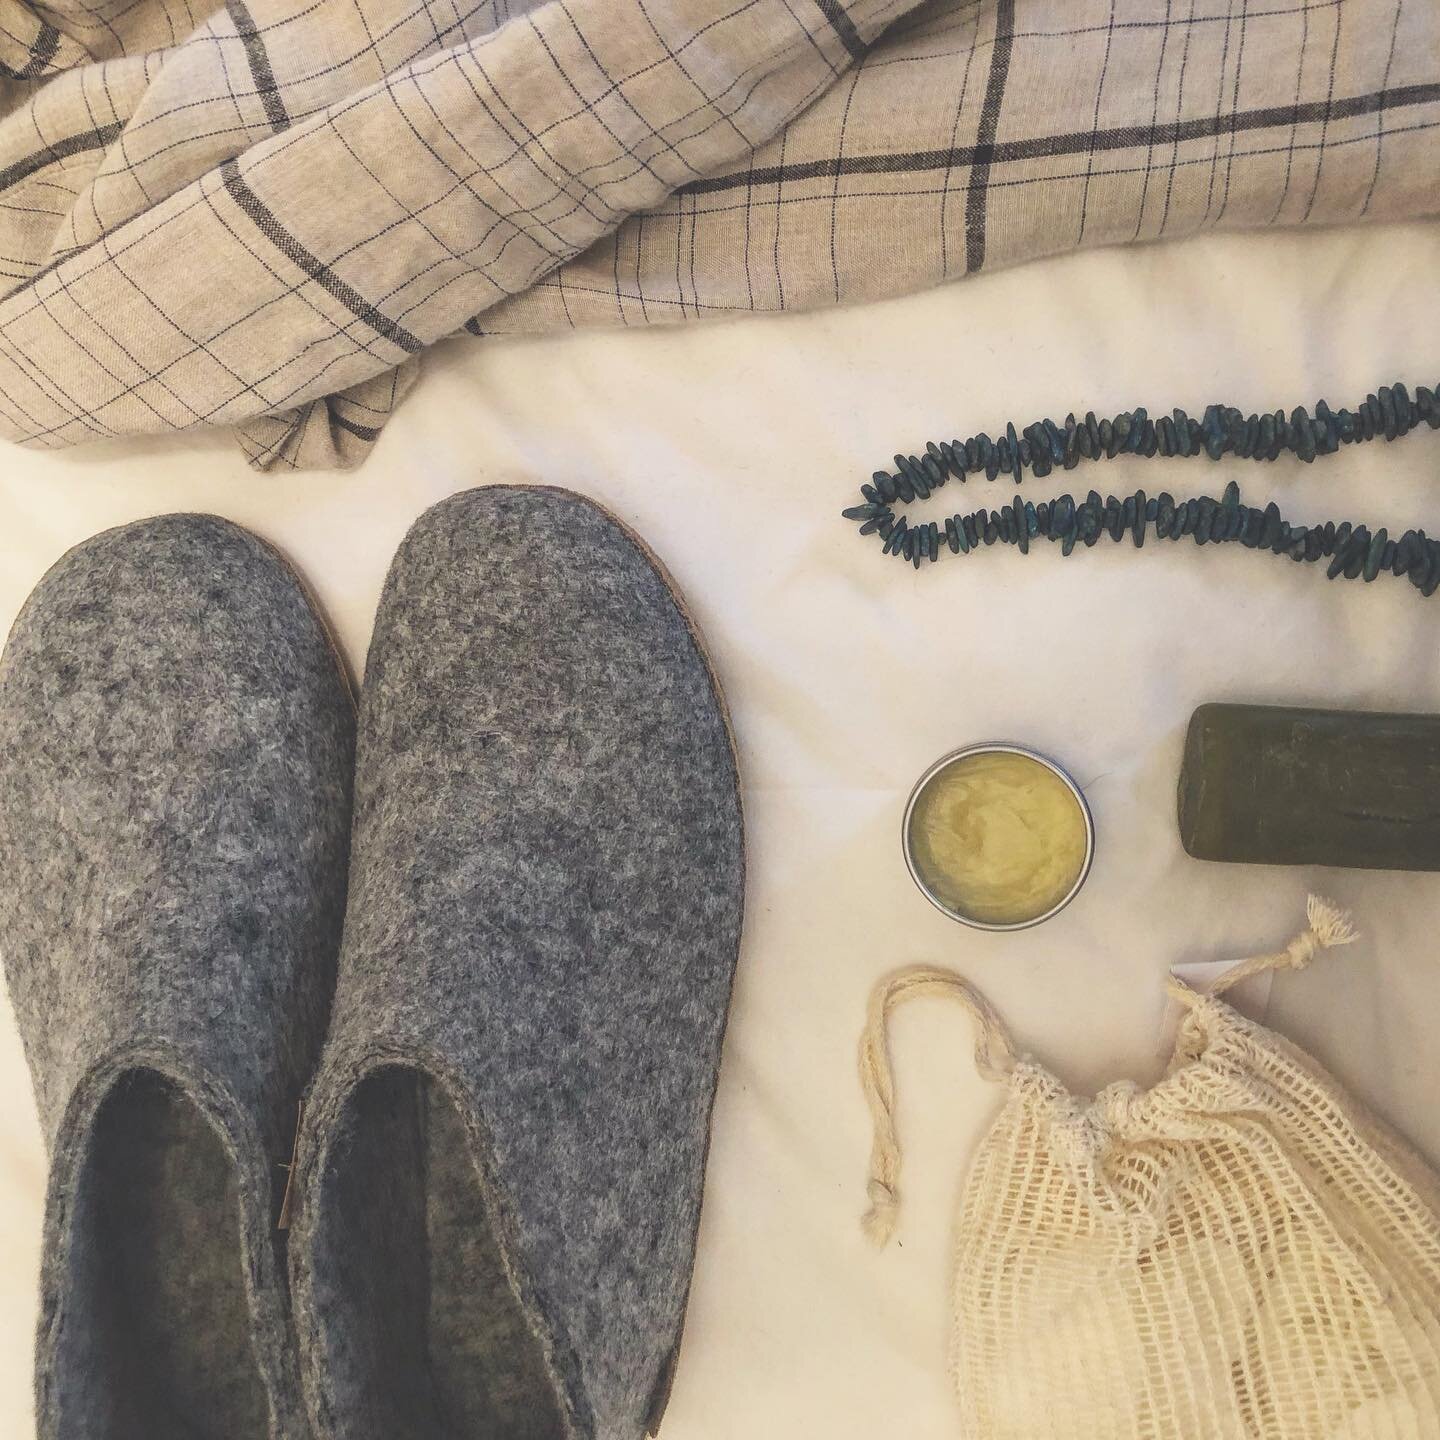 Time to get comfy in my favourite shirt and glerups, relax and maybe even pop on an old movie 🍿 

How&rsquo;s your Sunday? 

#sundayvibes #oldmovies #relax 
#glerups #kamesfarm #sliponshoes #comfort #sustainablefashion #felted #feltedslipons #lifeon